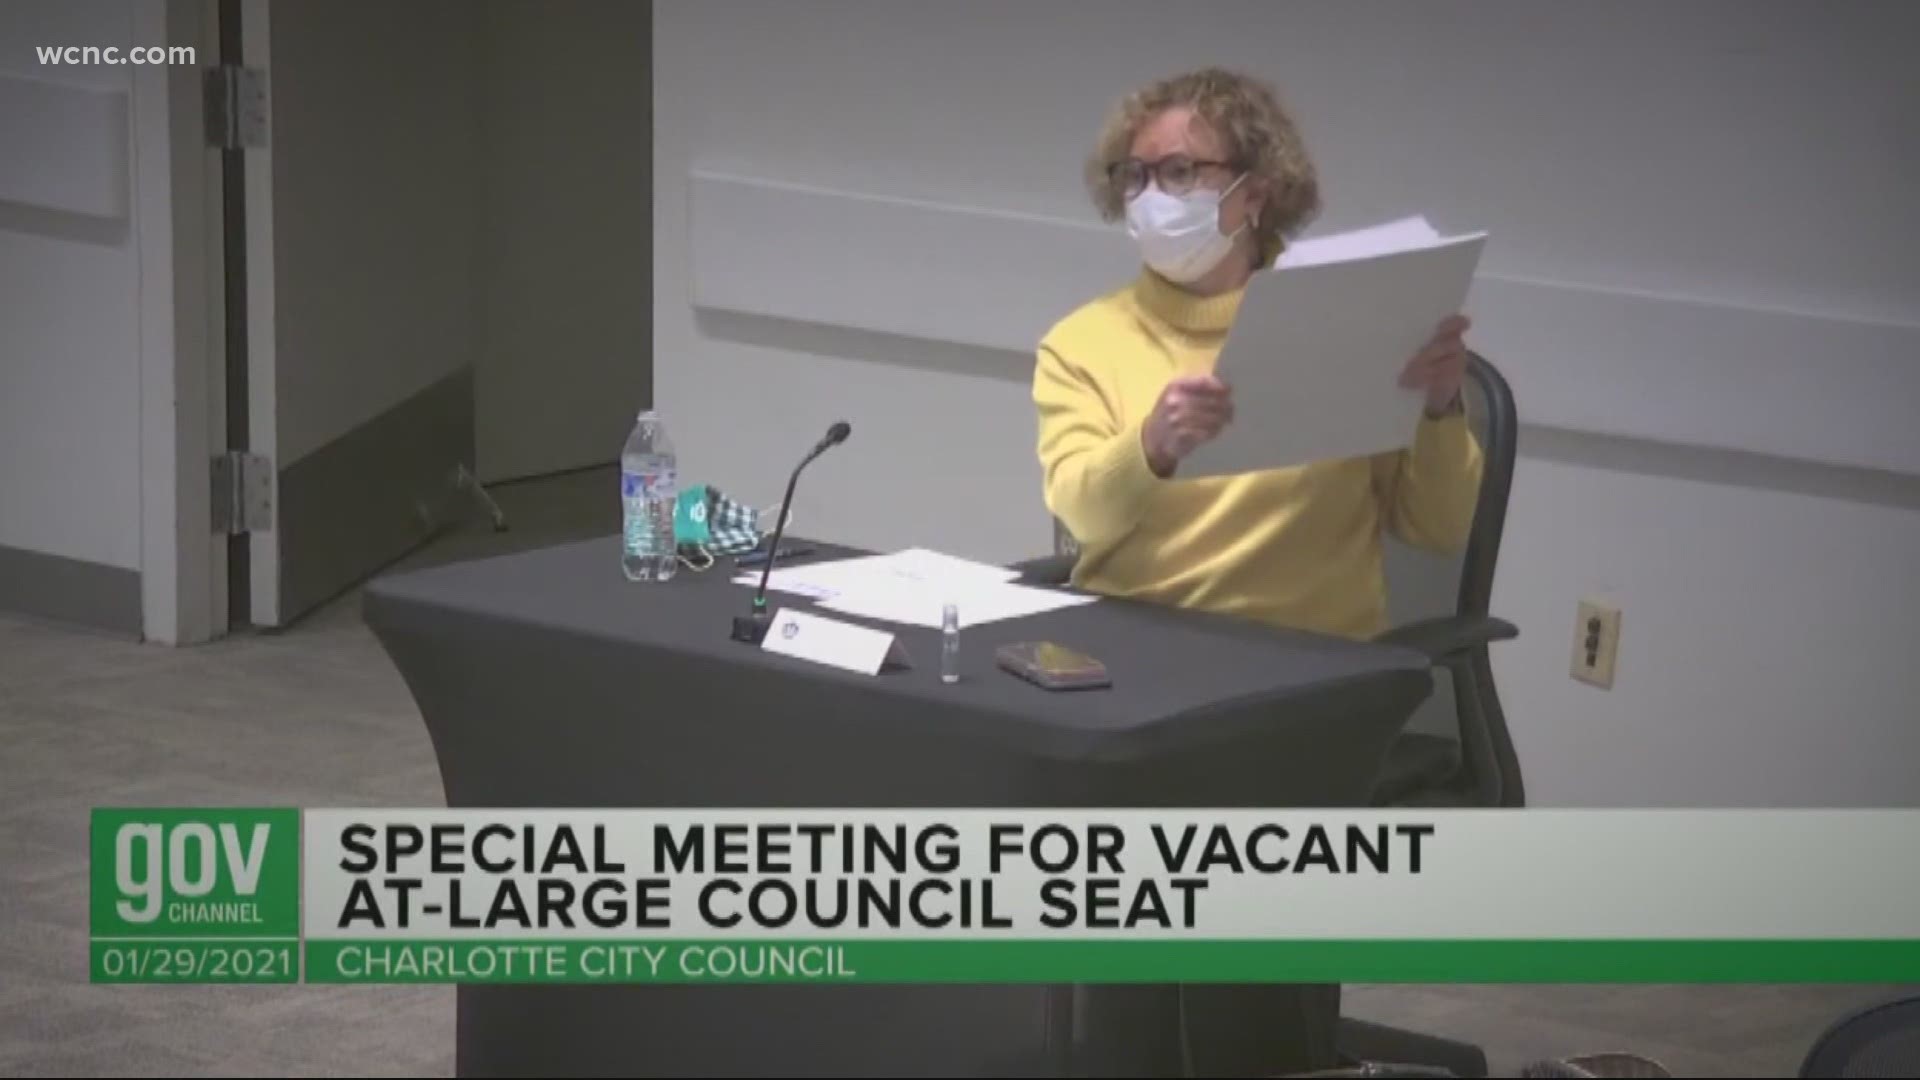 City leaders will have a busy weekend figuring out who they want to have beside them on a virtual dais. But why are so many going for the position?